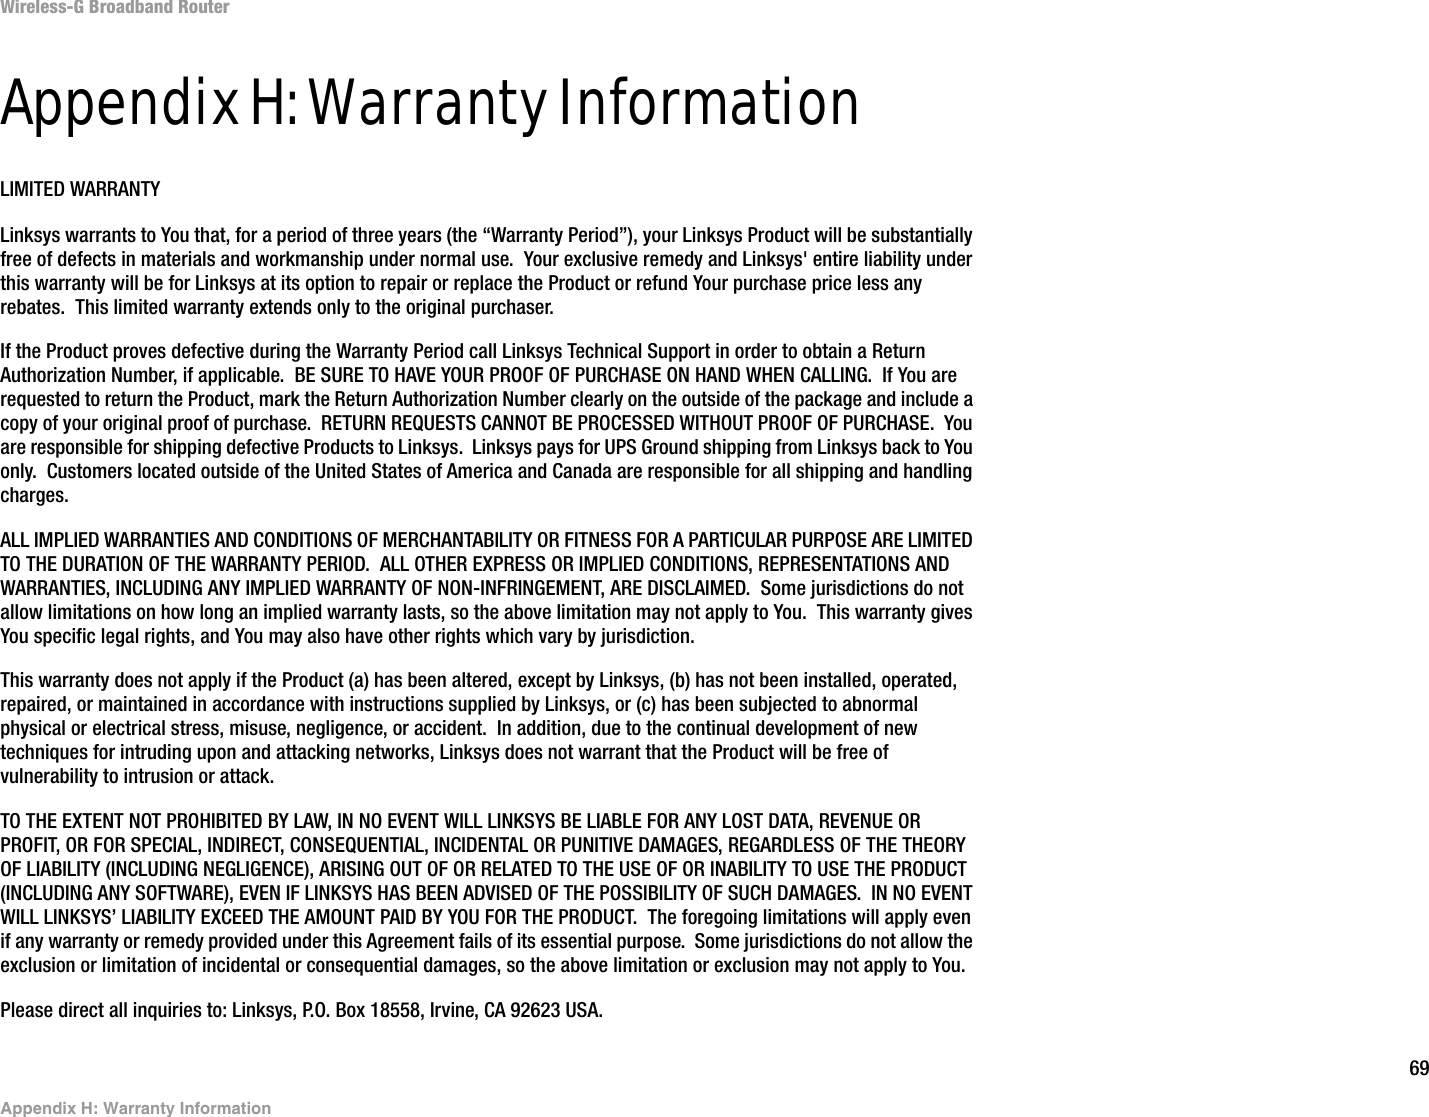 69Appendix H: Warranty InformationWireless-G Broadband RouterAppendix H: Warranty InformationLIMITED WARRANTYLinksys warrants to You that, for a period of three years (the “Warranty Period”), your Linksys Product will be substantially free of defects in materials and workmanship under normal use.  Your exclusive remedy and Linksys&apos; entire liability under this warranty will be for Linksys at its option to repair or replace the Product or refund Your purchase price less any rebates.  This limited warranty extends only to the original purchaser.  If the Product proves defective during the Warranty Period call Linksys Technical Support in order to obtain a Return Authorization Number, if applicable.  BE SURE TO HAVE YOUR PROOF OF PURCHASE ON HAND WHEN CALLING.  If You are requested to return the Product, mark the Return Authorization Number clearly on the outside of the package and include a copy of your original proof of purchase.  RETURN REQUESTS CANNOT BE PROCESSED WITHOUT PROOF OF PURCHASE.  You are responsible for shipping defective Products to Linksys.  Linksys pays for UPS Ground shipping from Linksys back to You only.  Customers located outside of the United States of America and Canada are responsible for all shipping and handling charges. ALL IMPLIED WARRANTIES AND CONDITIONS OF MERCHANTABILITY OR FITNESS FOR A PARTICULAR PURPOSE ARE LIMITED TO THE DURATION OF THE WARRANTY PERIOD.  ALL OTHER EXPRESS OR IMPLIED CONDITIONS, REPRESENTATIONS AND WARRANTIES, INCLUDING ANY IMPLIED WARRANTY OF NON-INFRINGEMENT, ARE DISCLAIMED.  Some jurisdictions do not allow limitations on how long an implied warranty lasts, so the above limitation may not apply to You.  This warranty gives You specific legal rights, and You may also have other rights which vary by jurisdiction.This warranty does not apply if the Product (a) has been altered, except by Linksys, (b) has not been installed, operated, repaired, or maintained in accordance with instructions supplied by Linksys, or (c) has been subjected to abnormal physical or electrical stress, misuse, negligence, or accident.  In addition, due to the continual development of new techniques for intruding upon and attacking networks, Linksys does not warrant that the Product will be free of vulnerability to intrusion or attack.TO THE EXTENT NOT PROHIBITED BY LAW, IN NO EVENT WILL LINKSYS BE LIABLE FOR ANY LOST DATA, REVENUE OR PROFIT, OR FOR SPECIAL, INDIRECT, CONSEQUENTIAL, INCIDENTAL OR PUNITIVE DAMAGES, REGARDLESS OF THE THEORY OF LIABILITY (INCLUDING NEGLIGENCE), ARISING OUT OF OR RELATED TO THE USE OF OR INABILITY TO USE THE PRODUCT (INCLUDING ANY SOFTWARE), EVEN IF LINKSYS HAS BEEN ADVISED OF THE POSSIBILITY OF SUCH DAMAGES.  IN NO EVENT WILL LINKSYS’ LIABILITY EXCEED THE AMOUNT PAID BY YOU FOR THE PRODUCT.  The foregoing limitations will apply even if any warranty or remedy provided under this Agreement fails of its essential purpose.  Some jurisdictions do not allow the exclusion or limitation of incidental or consequential damages, so the above limitation or exclusion may not apply to You.Please direct all inquiries to: Linksys, P.O. Box 18558, Irvine, CA 92623 USA.